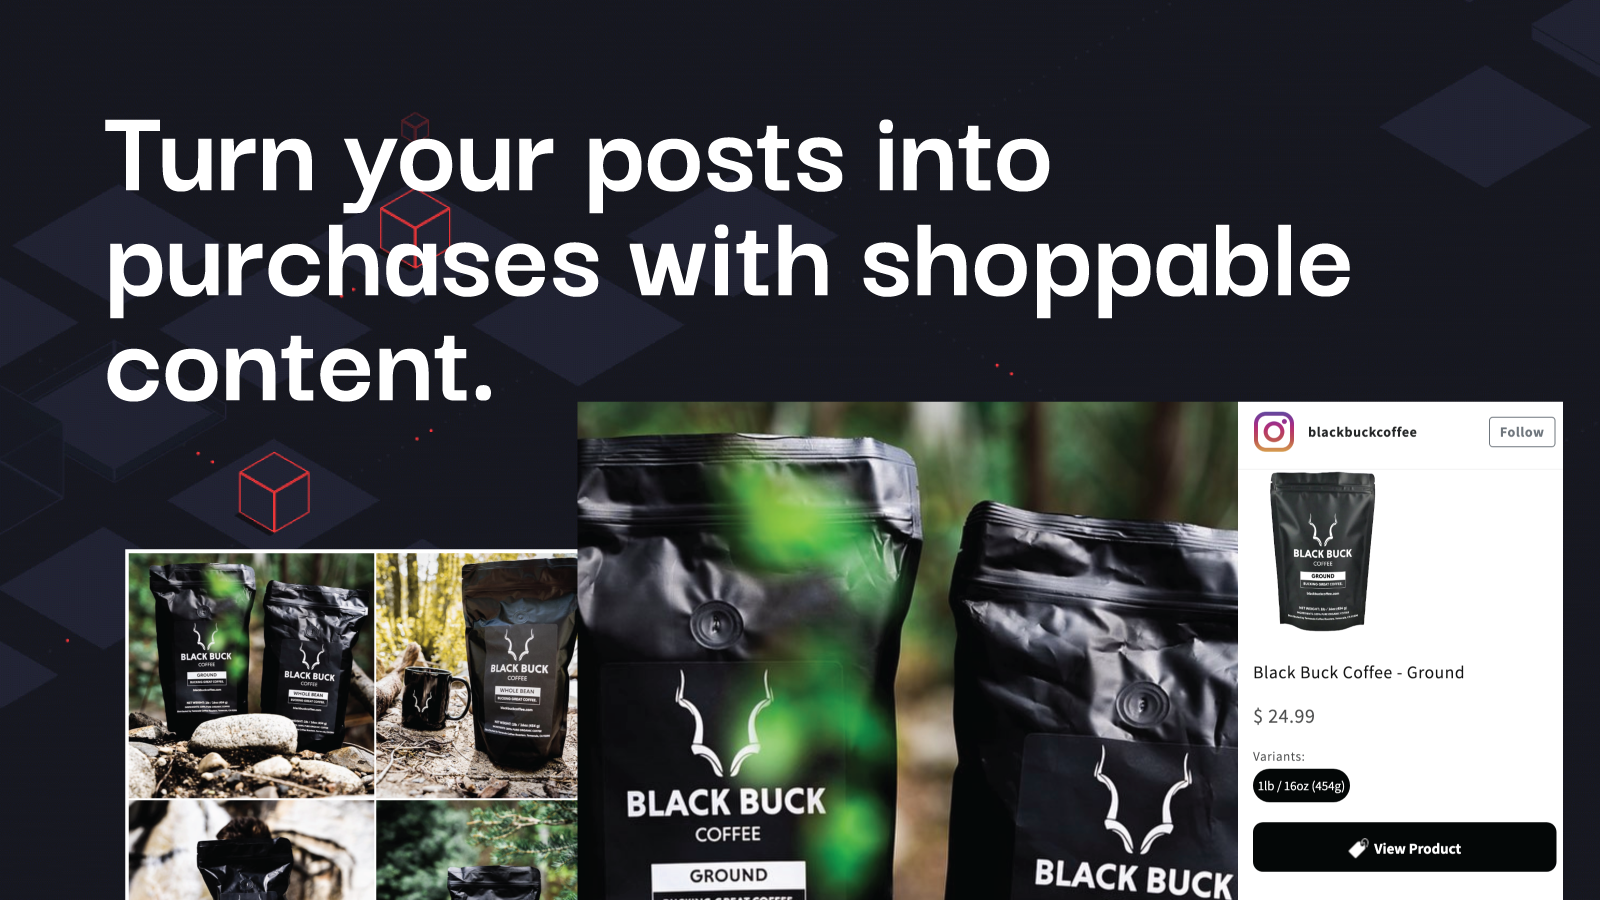 Turn posts into purchases with shoppable content